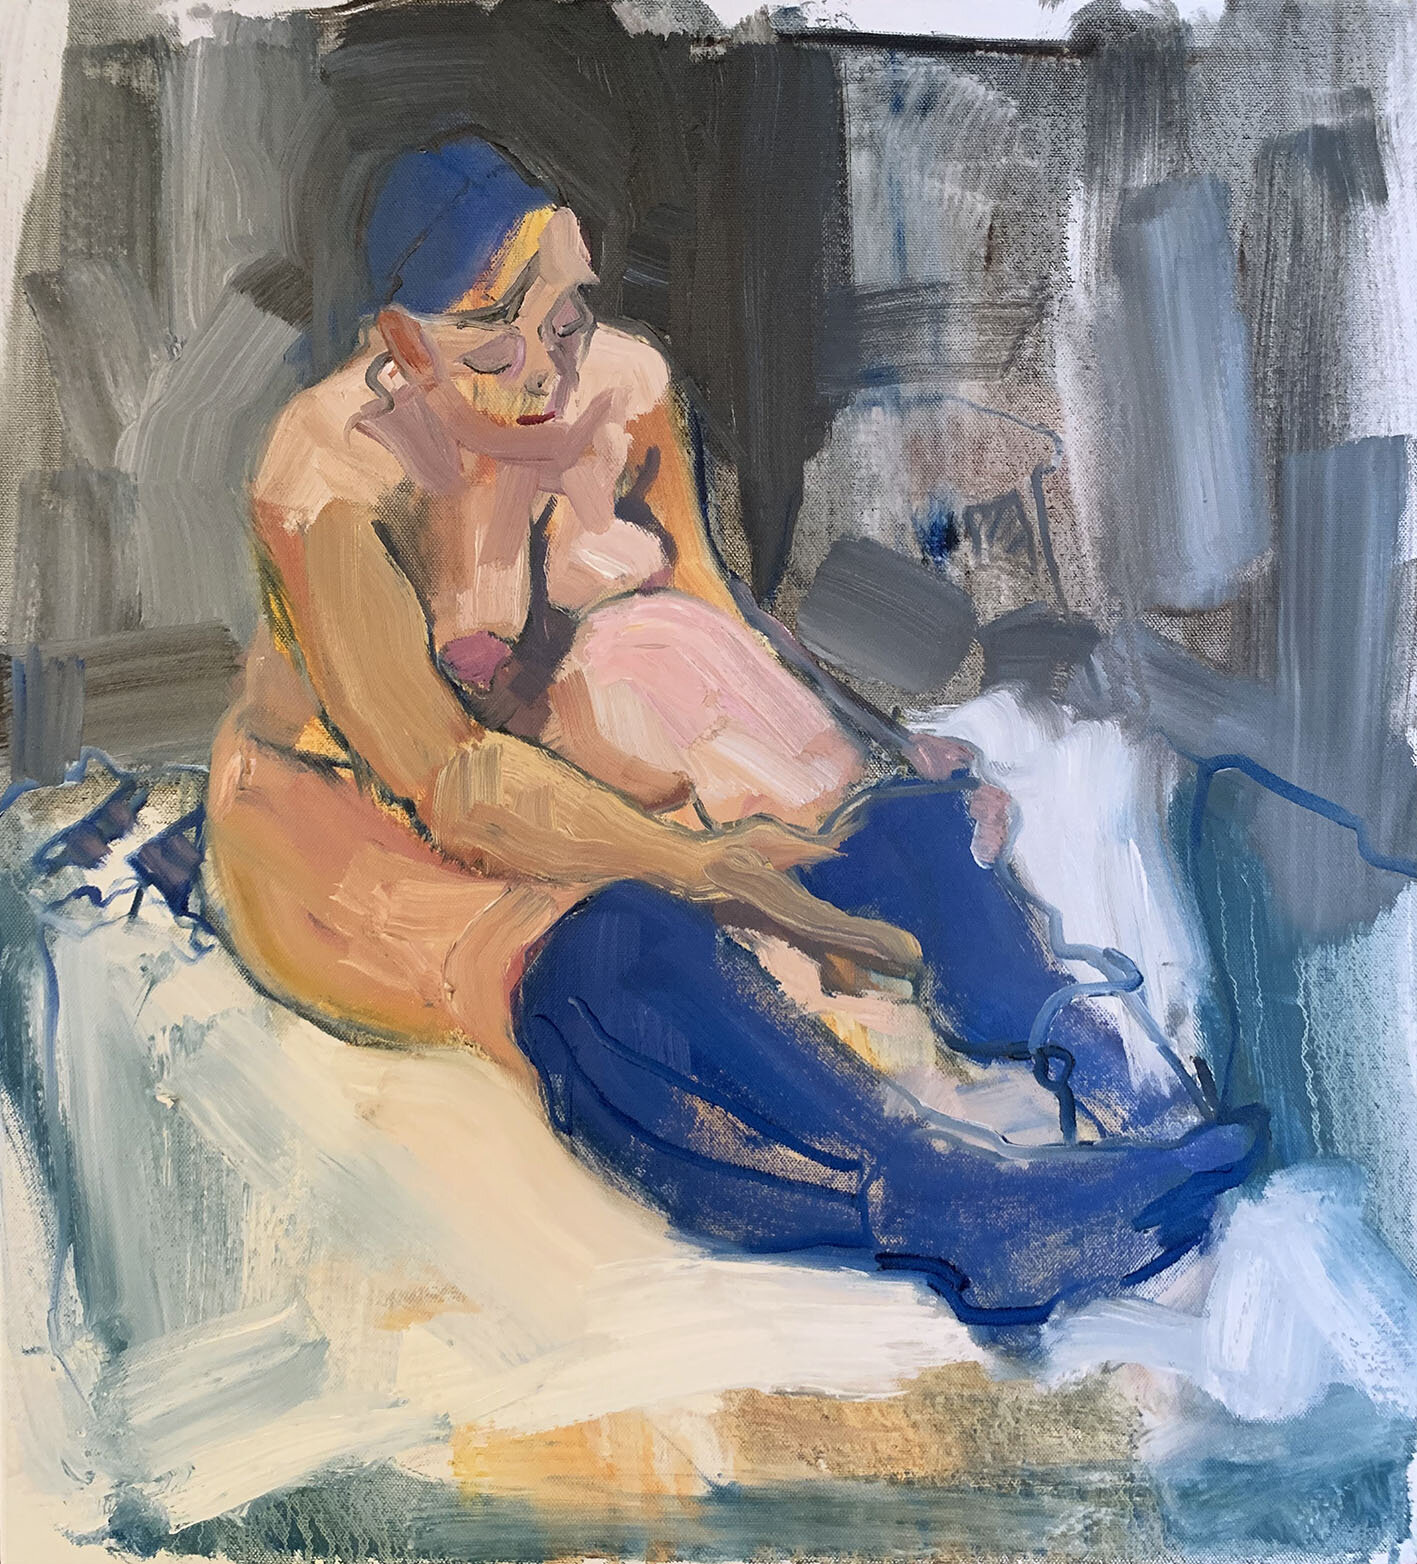 Woman with Blue Socks